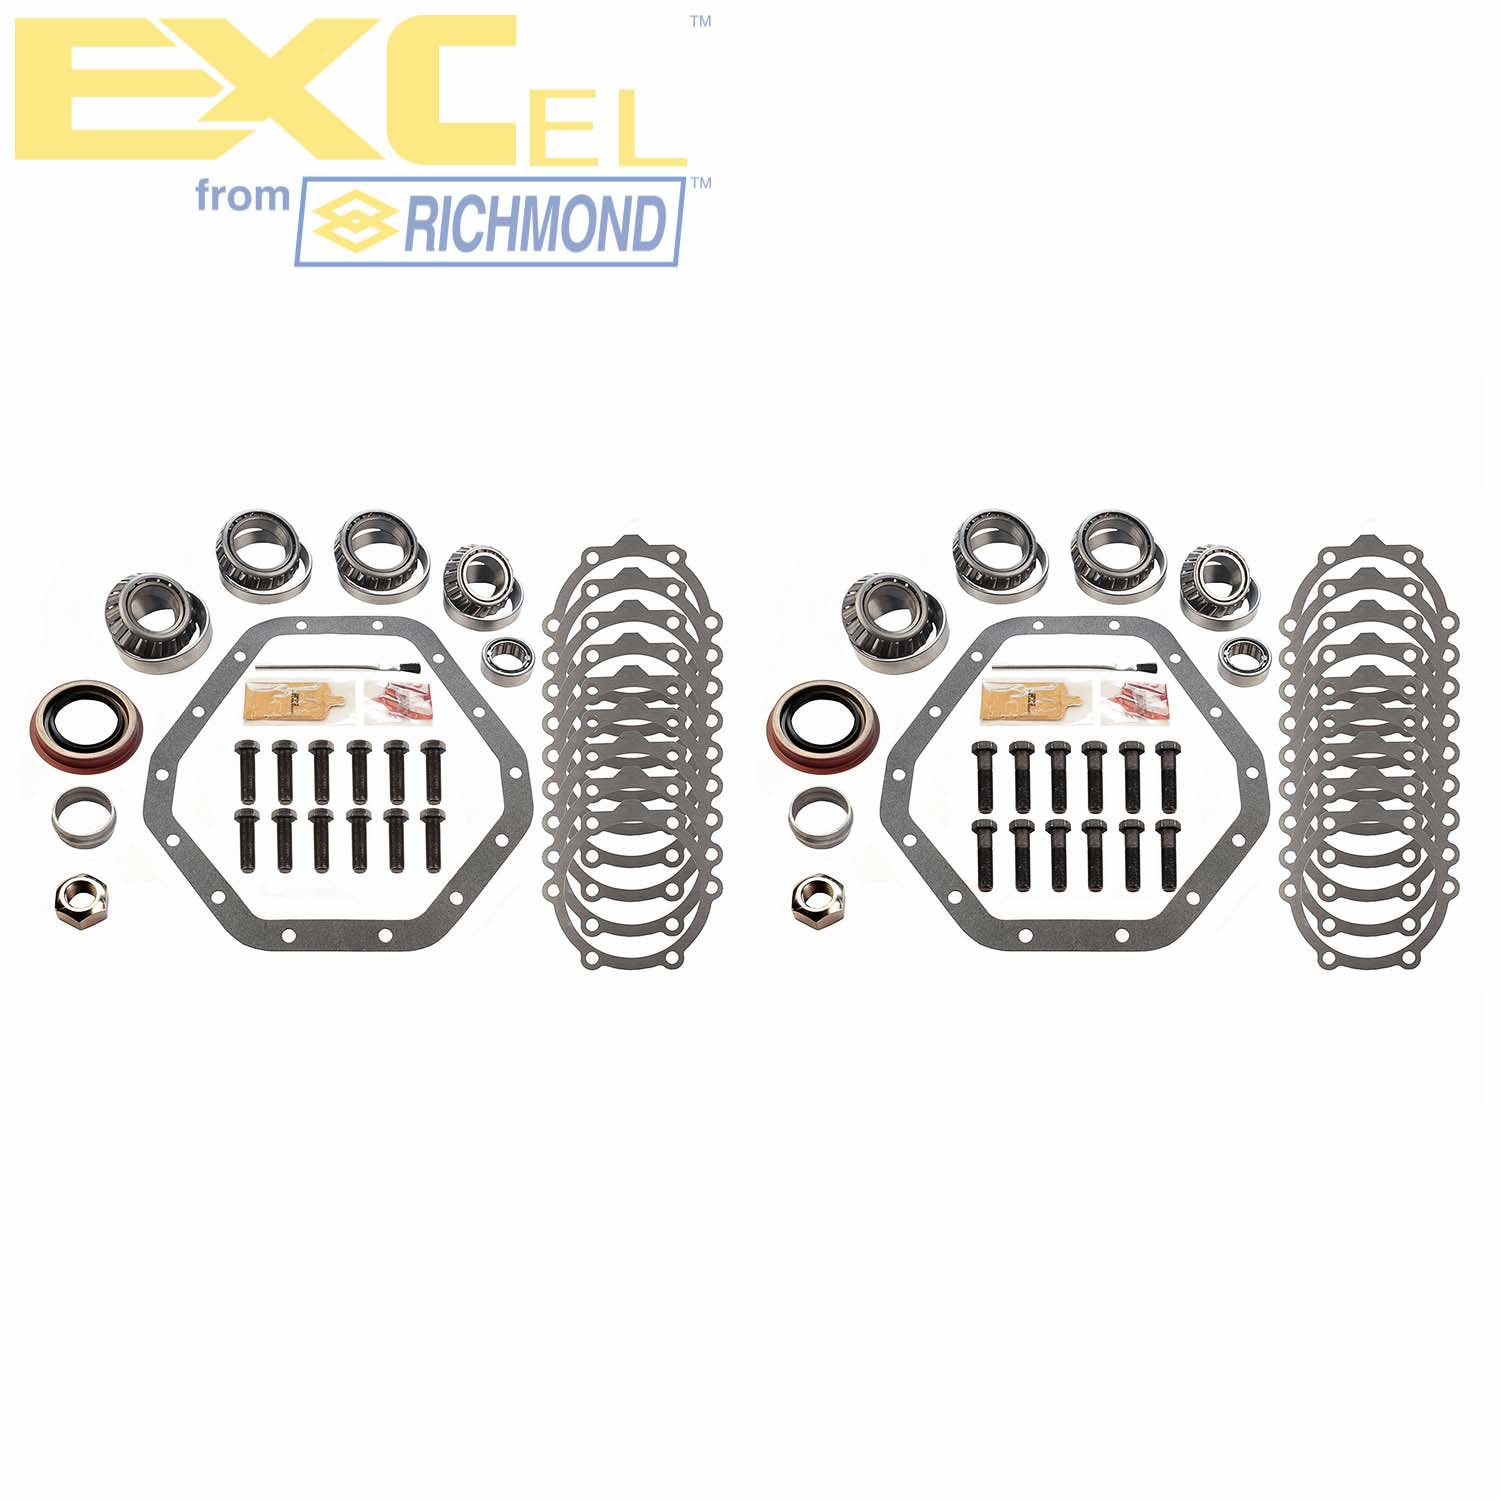 Excel XL-1063-1 Differential Bearing Kit